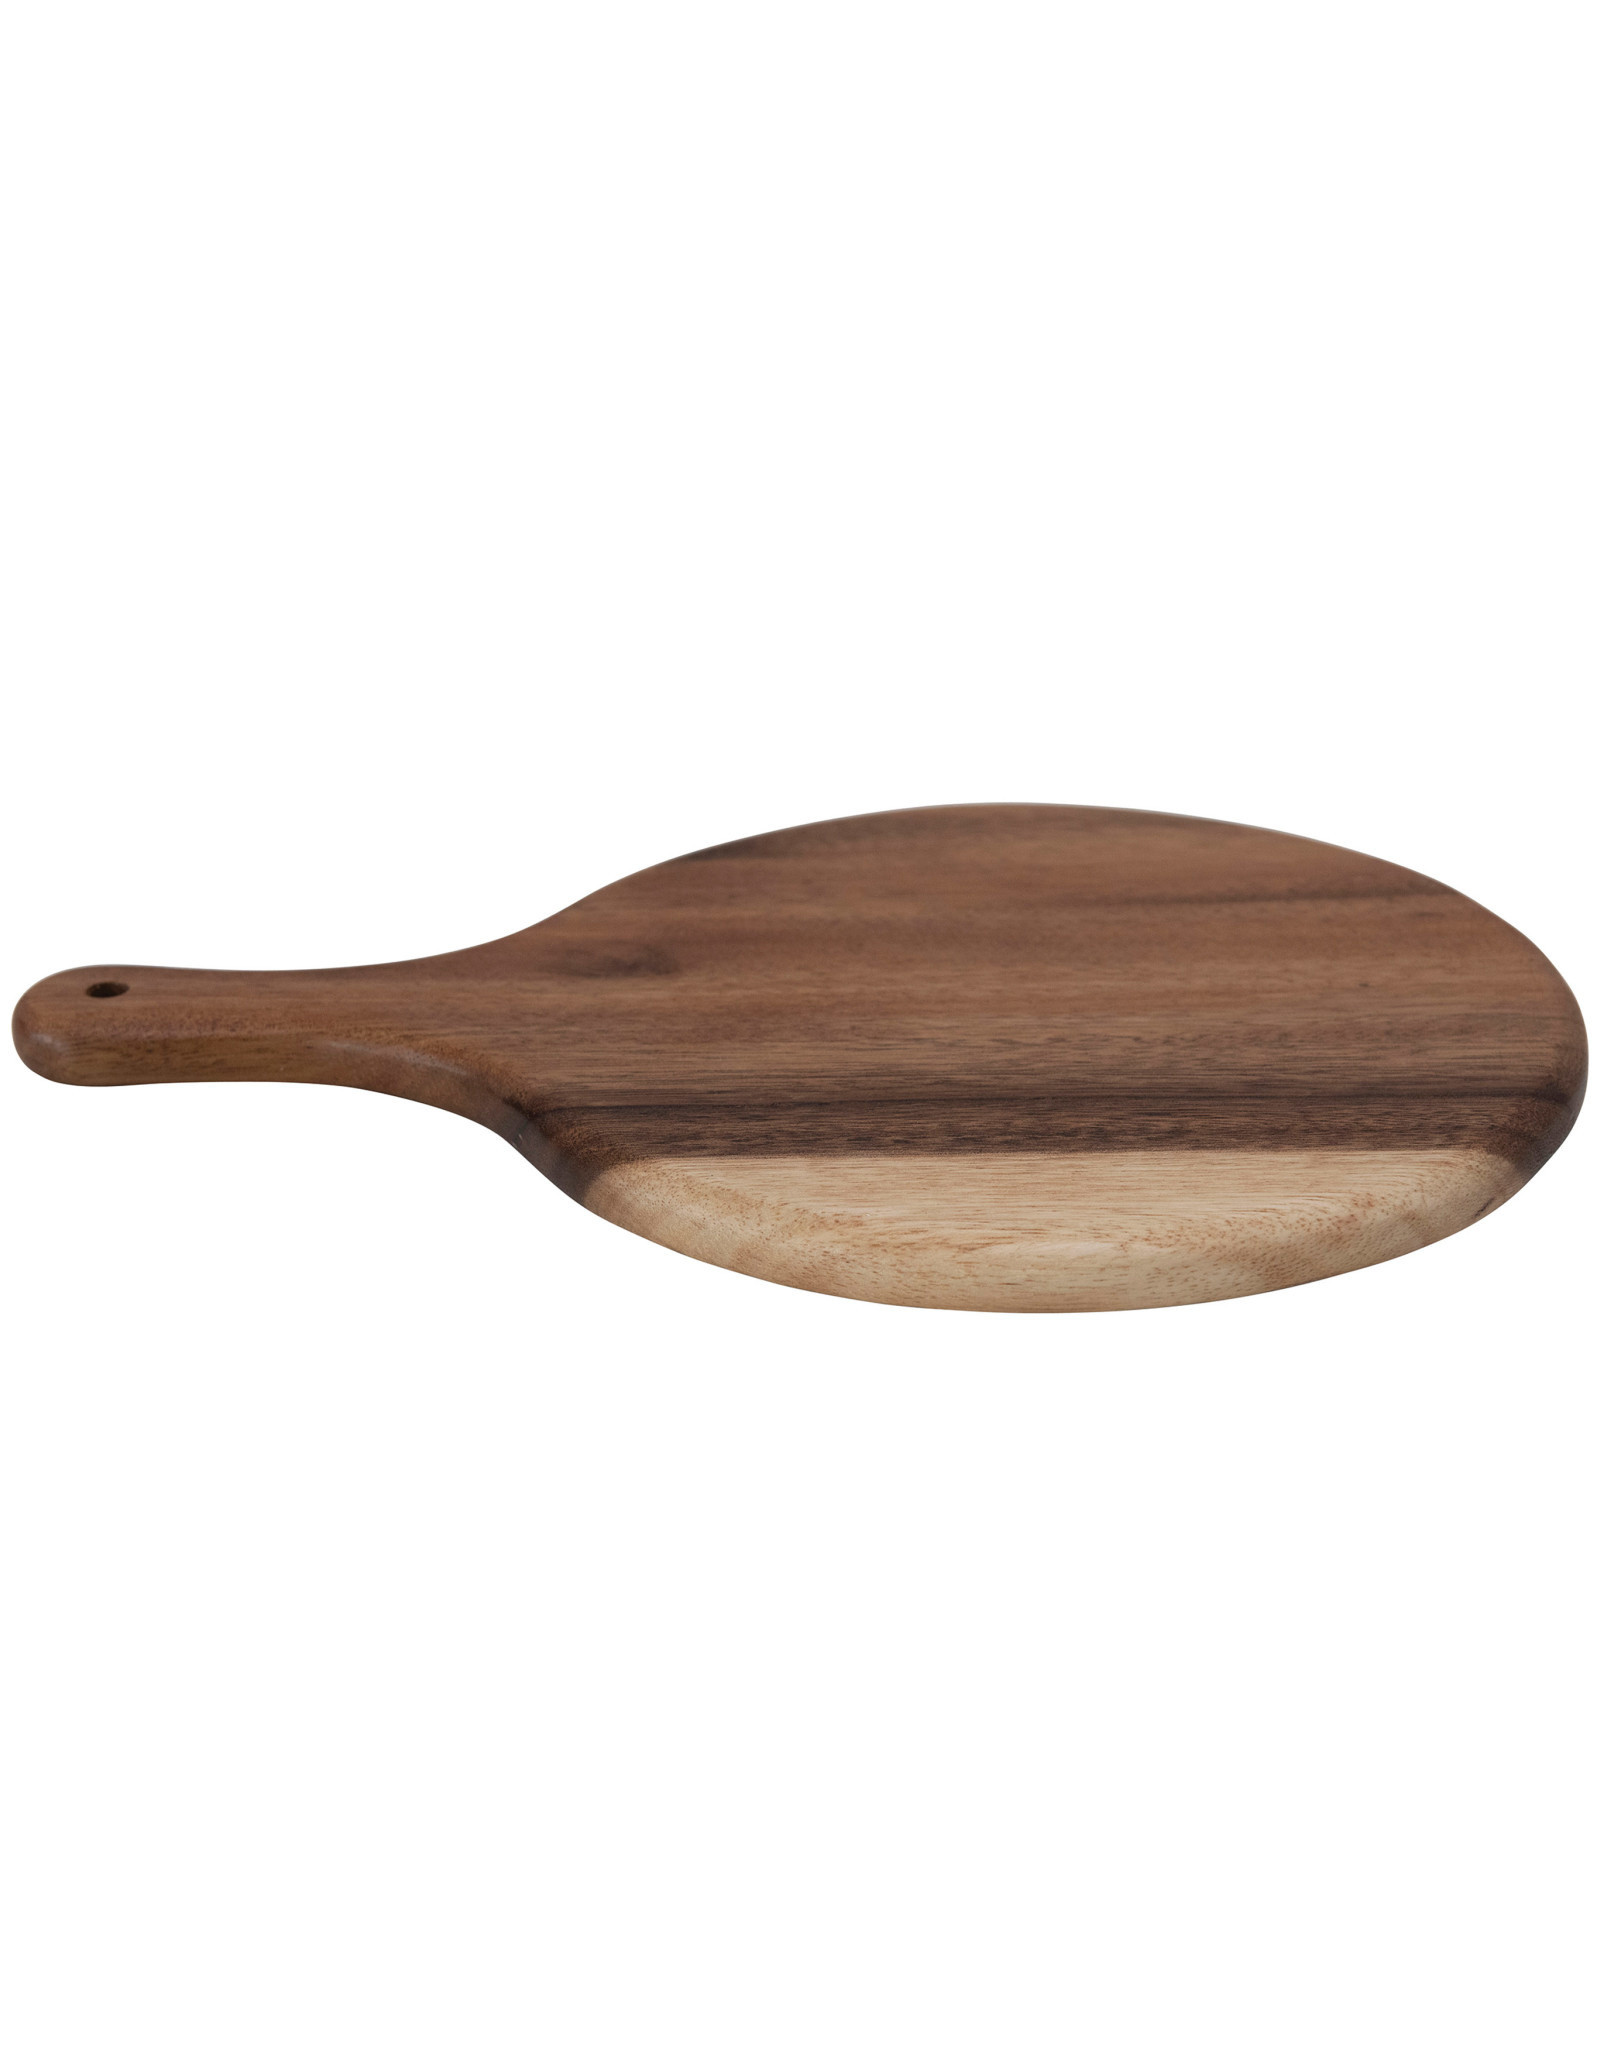 Suar Wood Cheese/Cutting Board with Handle 12 1/2" round